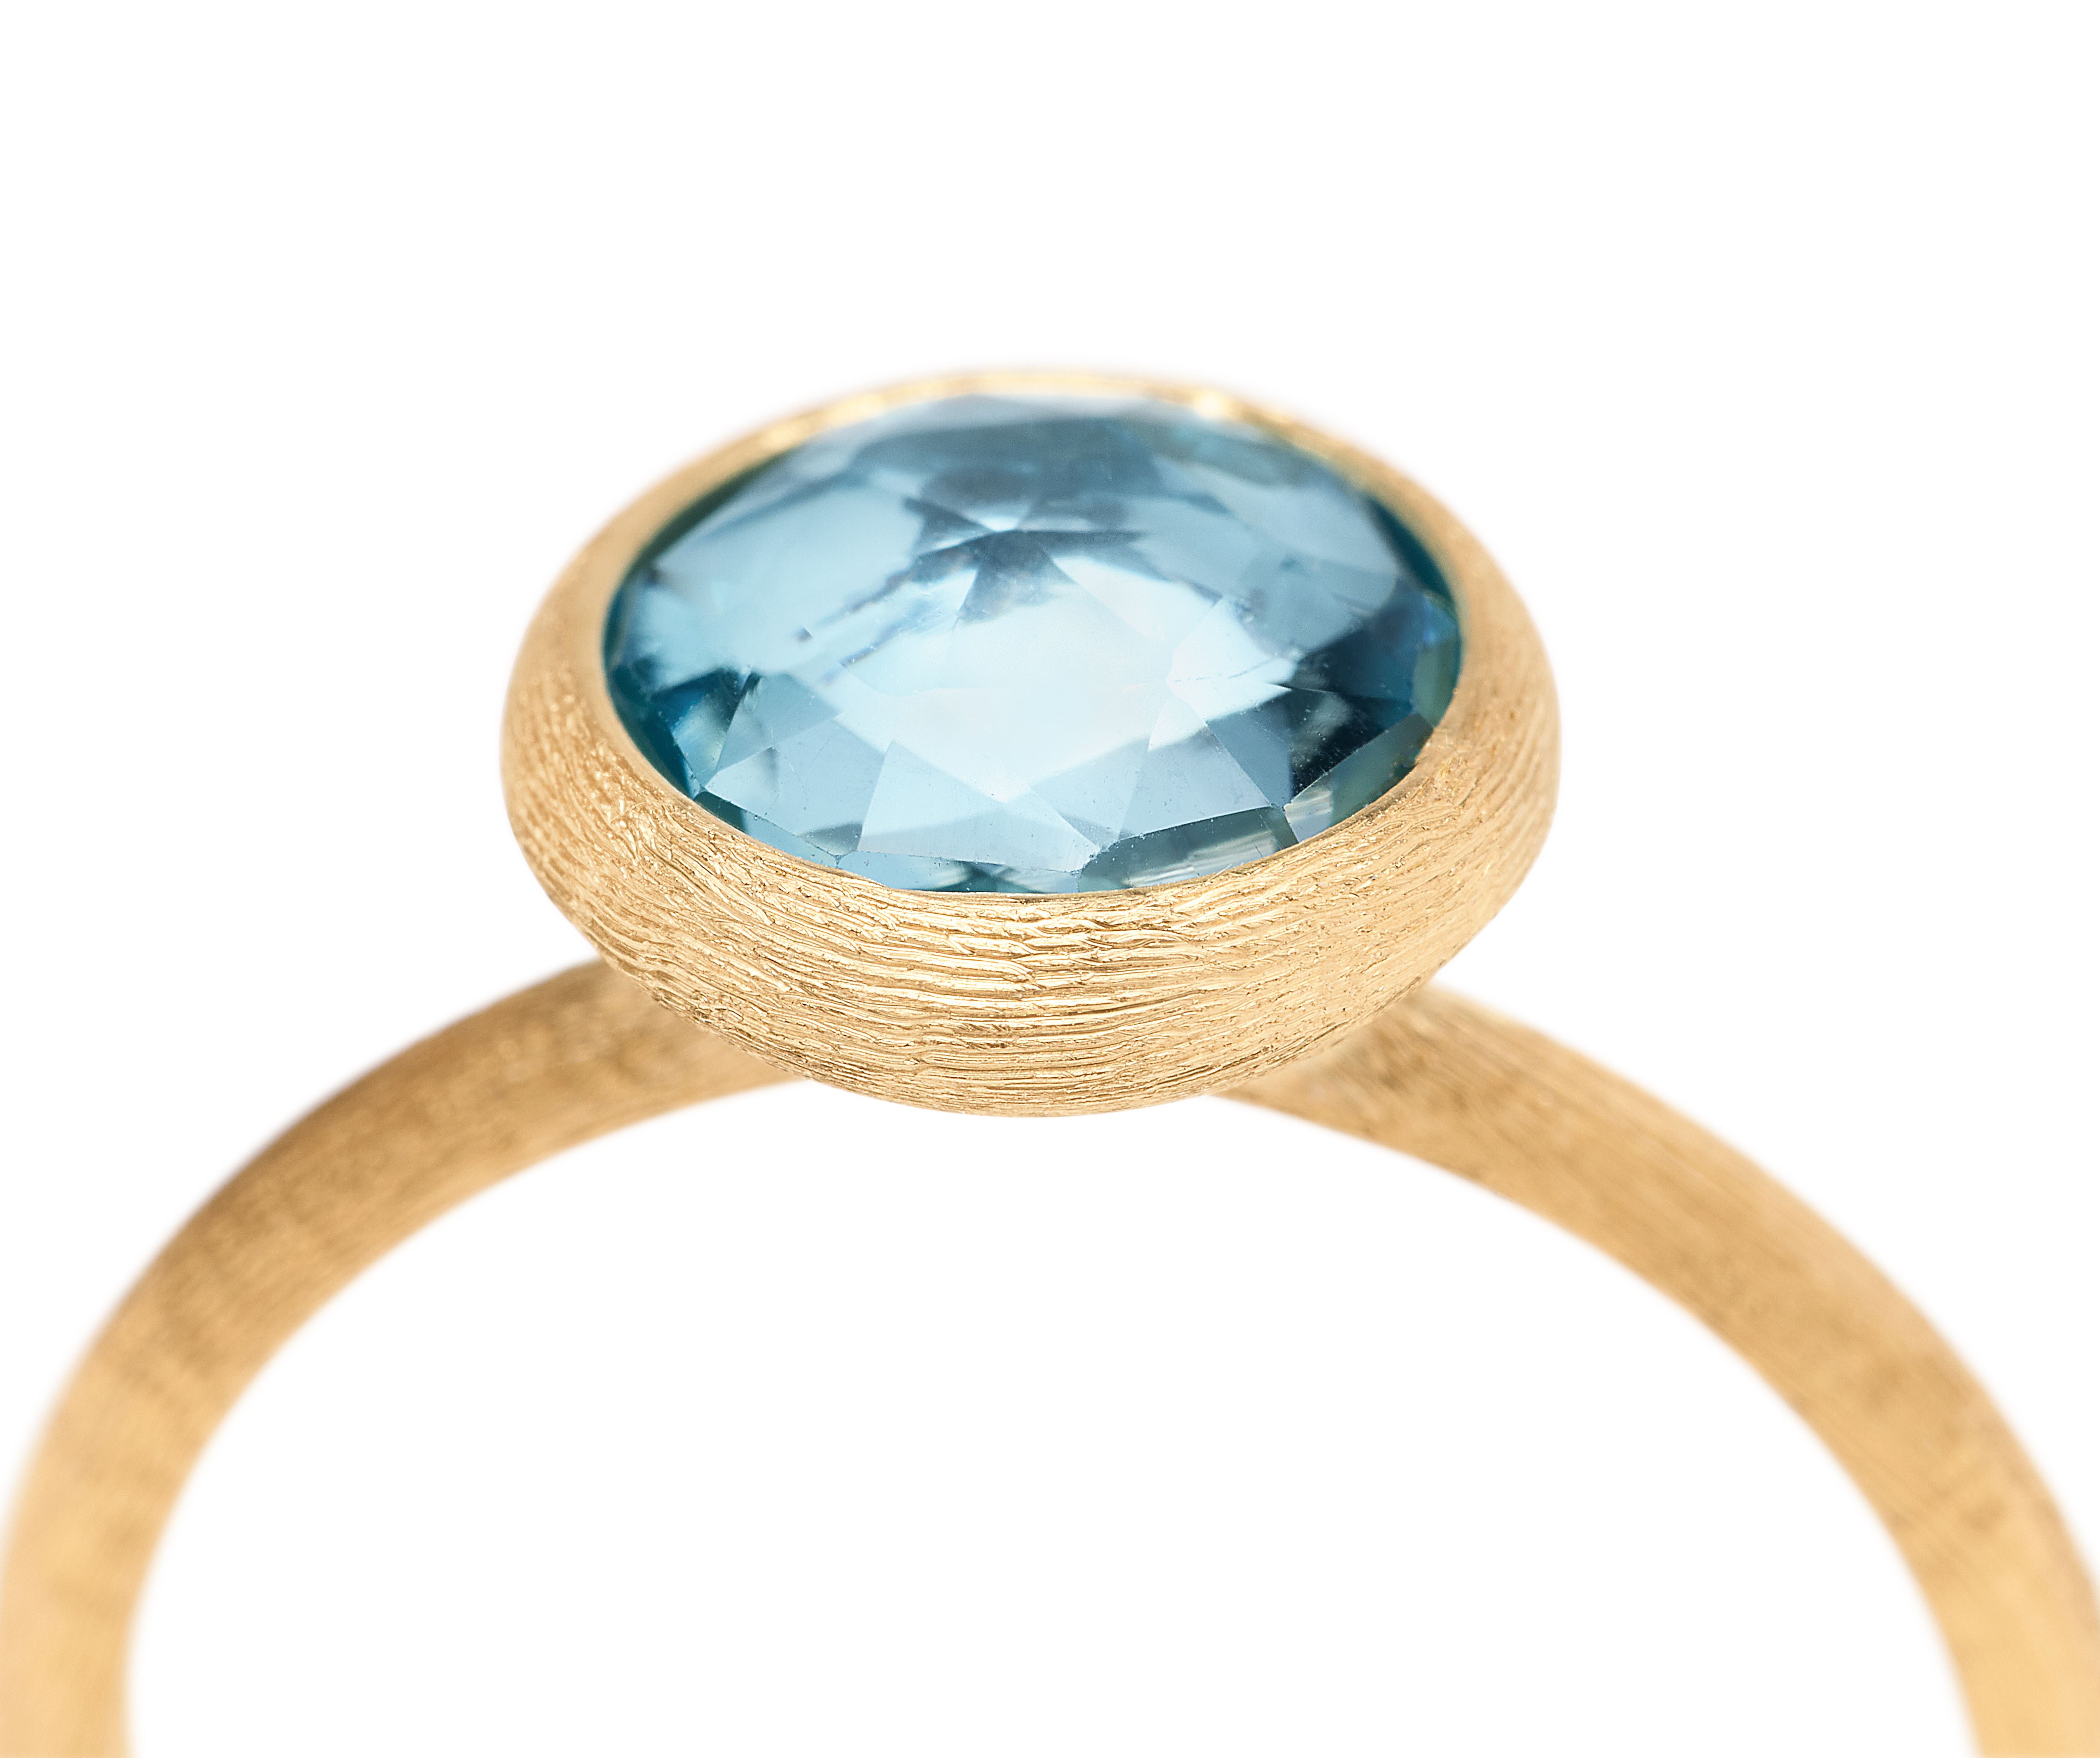 18K YELLOW GOLD BLUE TOPAZ RING FROM THE JAIPUR COLLECTION